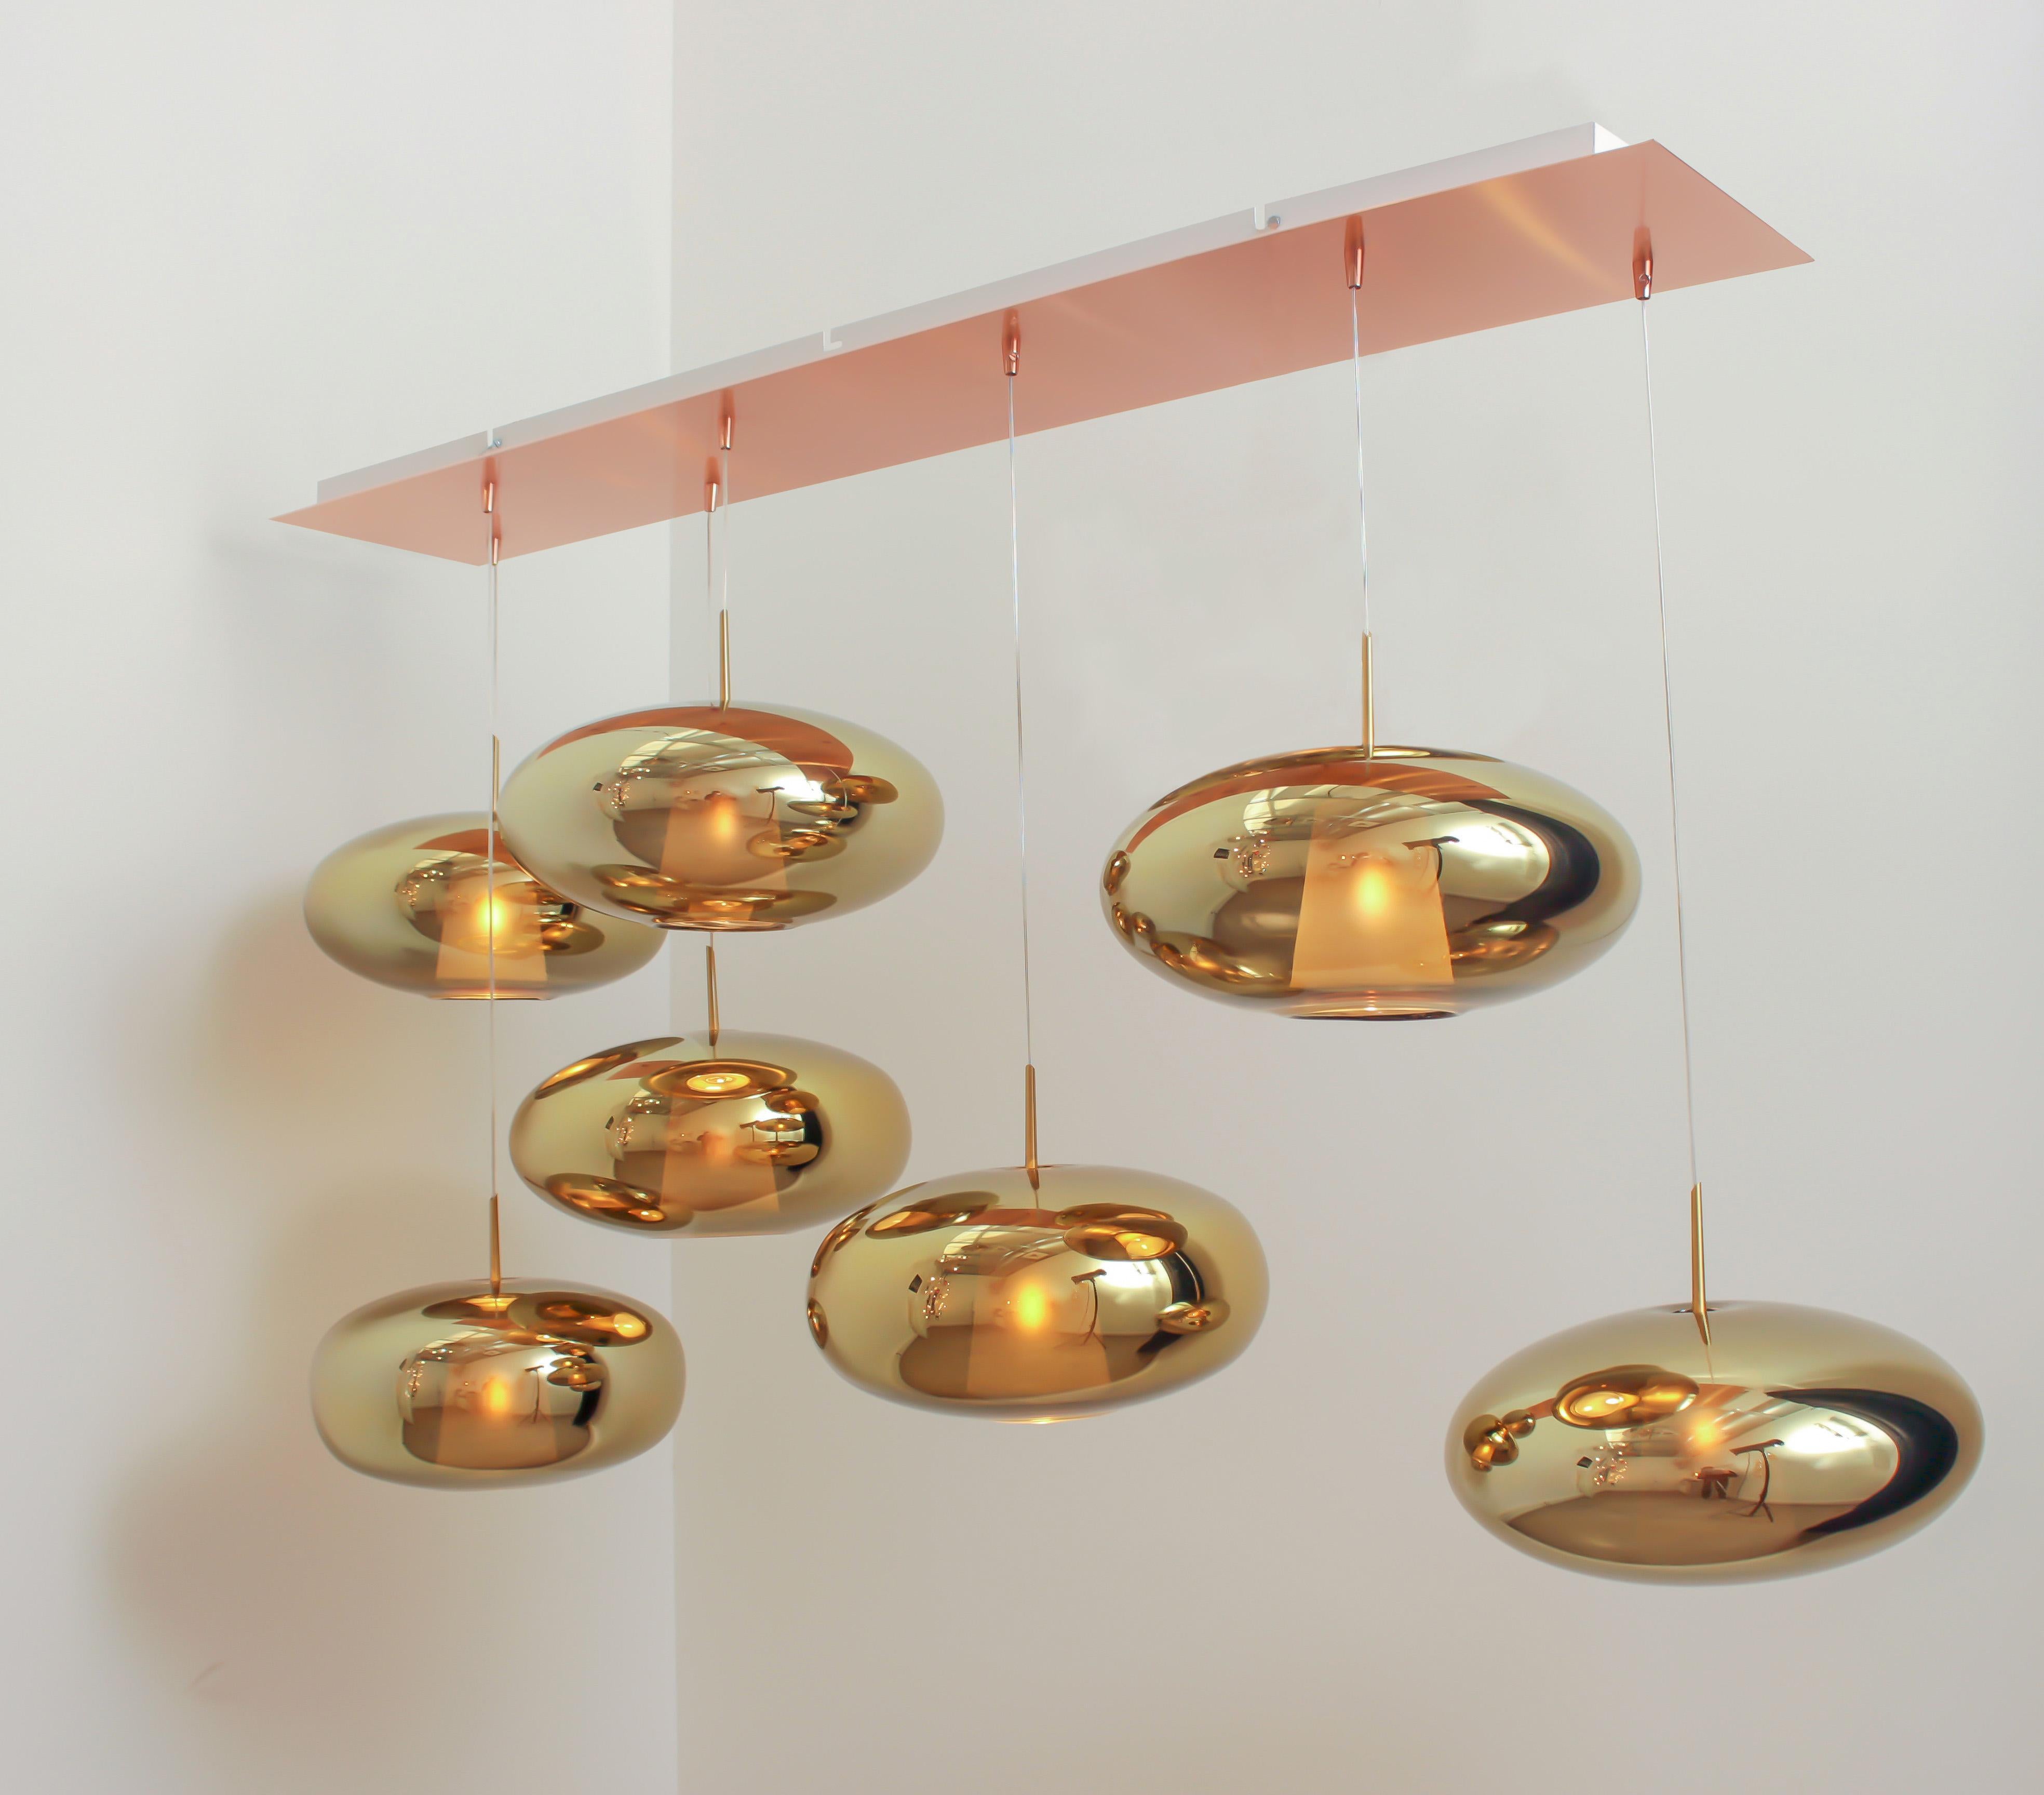 Hand blown glass pendants. 7 glass lights on 140 cm x 55 cm rectangular canopy.

Glass dimensions: ? 38 cm x H 17 cm. 

The Fantasia Extra glass and its saucer shape allows to play on the horizontality, where most of the suspensions bet on their